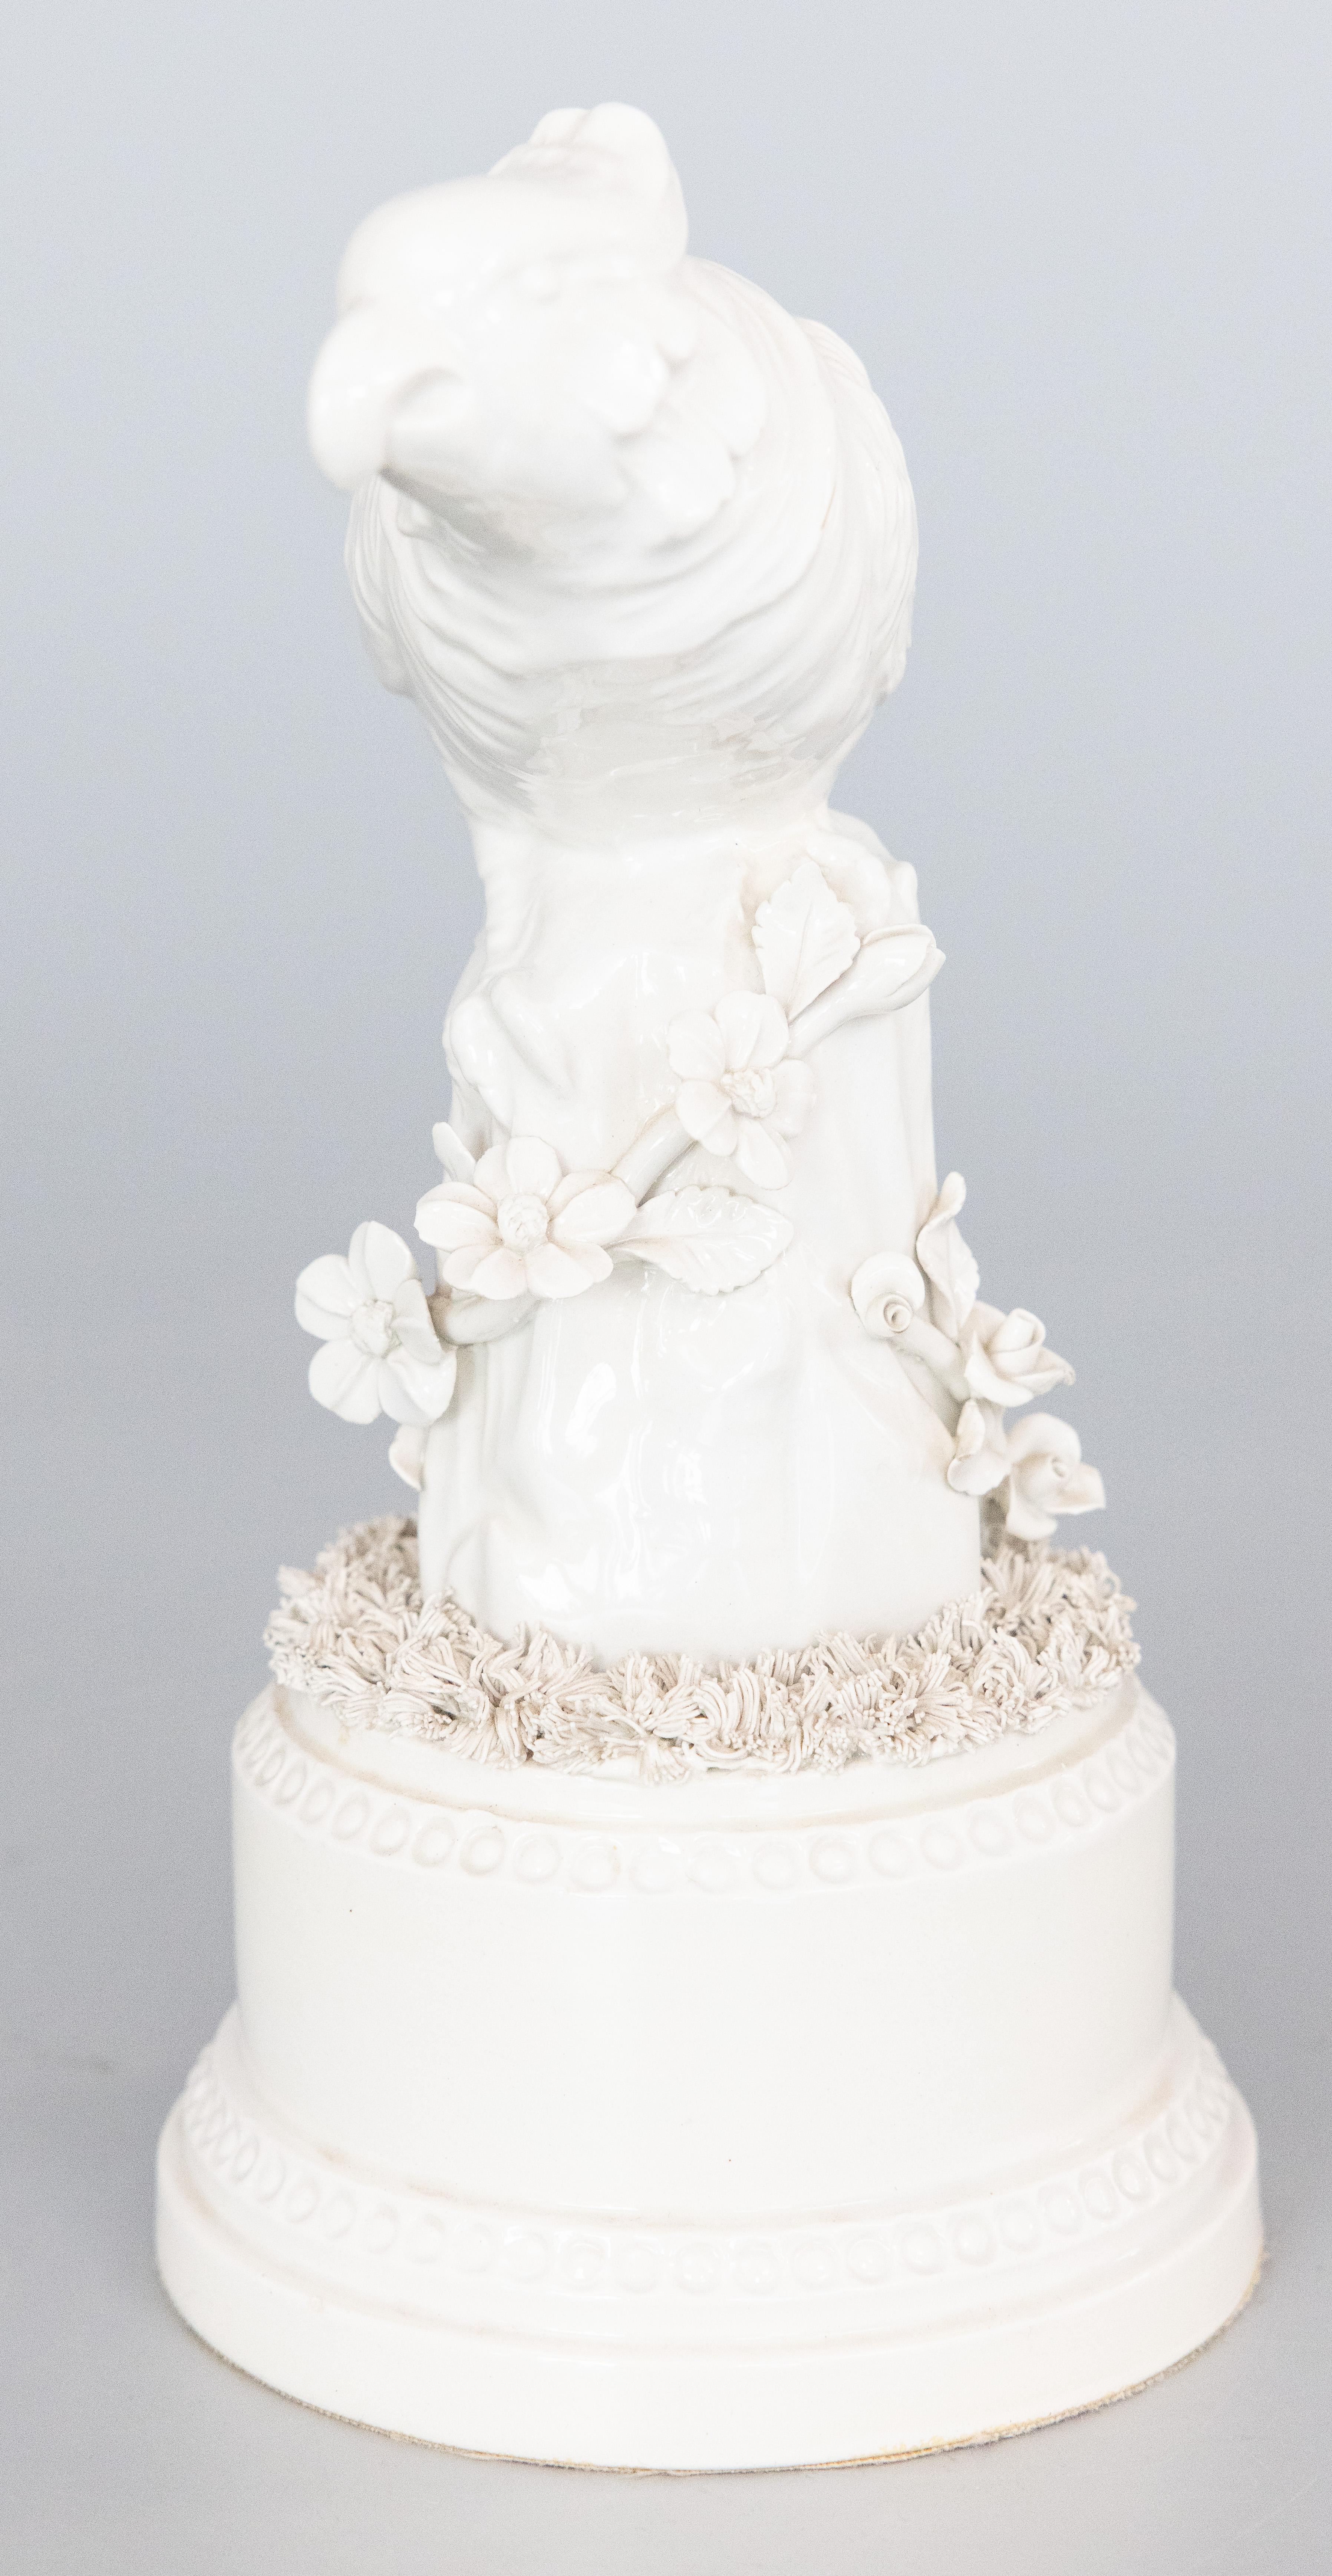 A lovely Mid-20th Century Italian white ceramic blanc de chine creamware parrot cockatiel bird sculpture figurine perched on a tree trunk pedestal adorned with flowers. Marked 